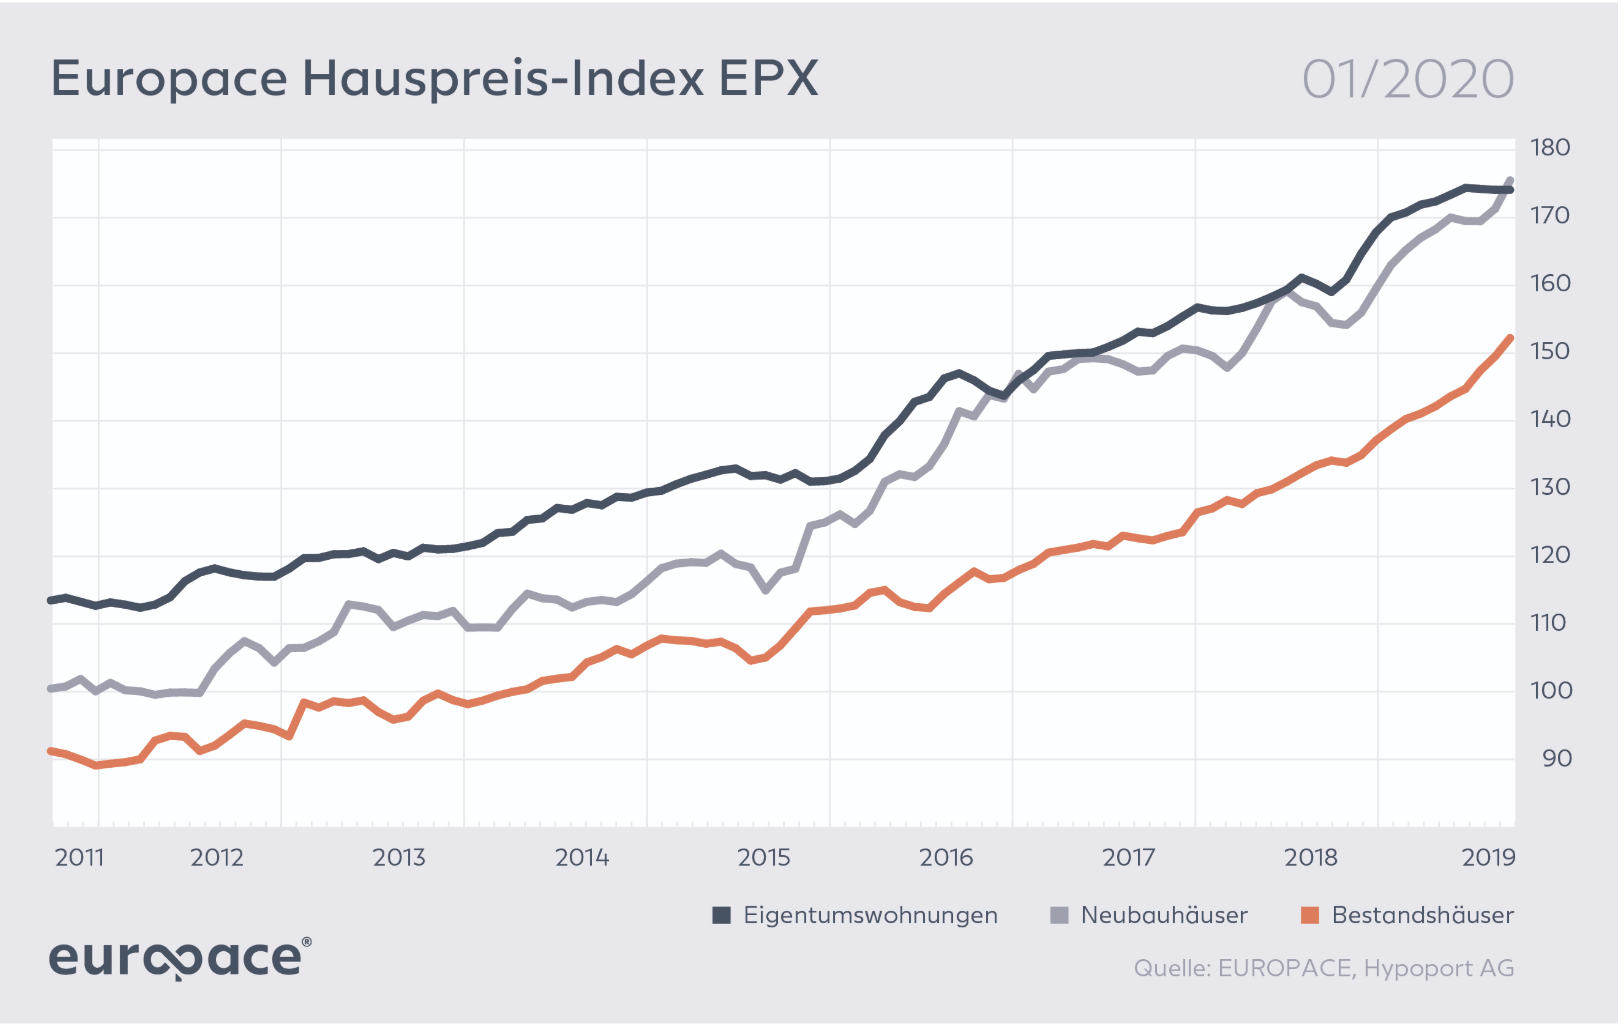 Real estate prices in Germany are going up